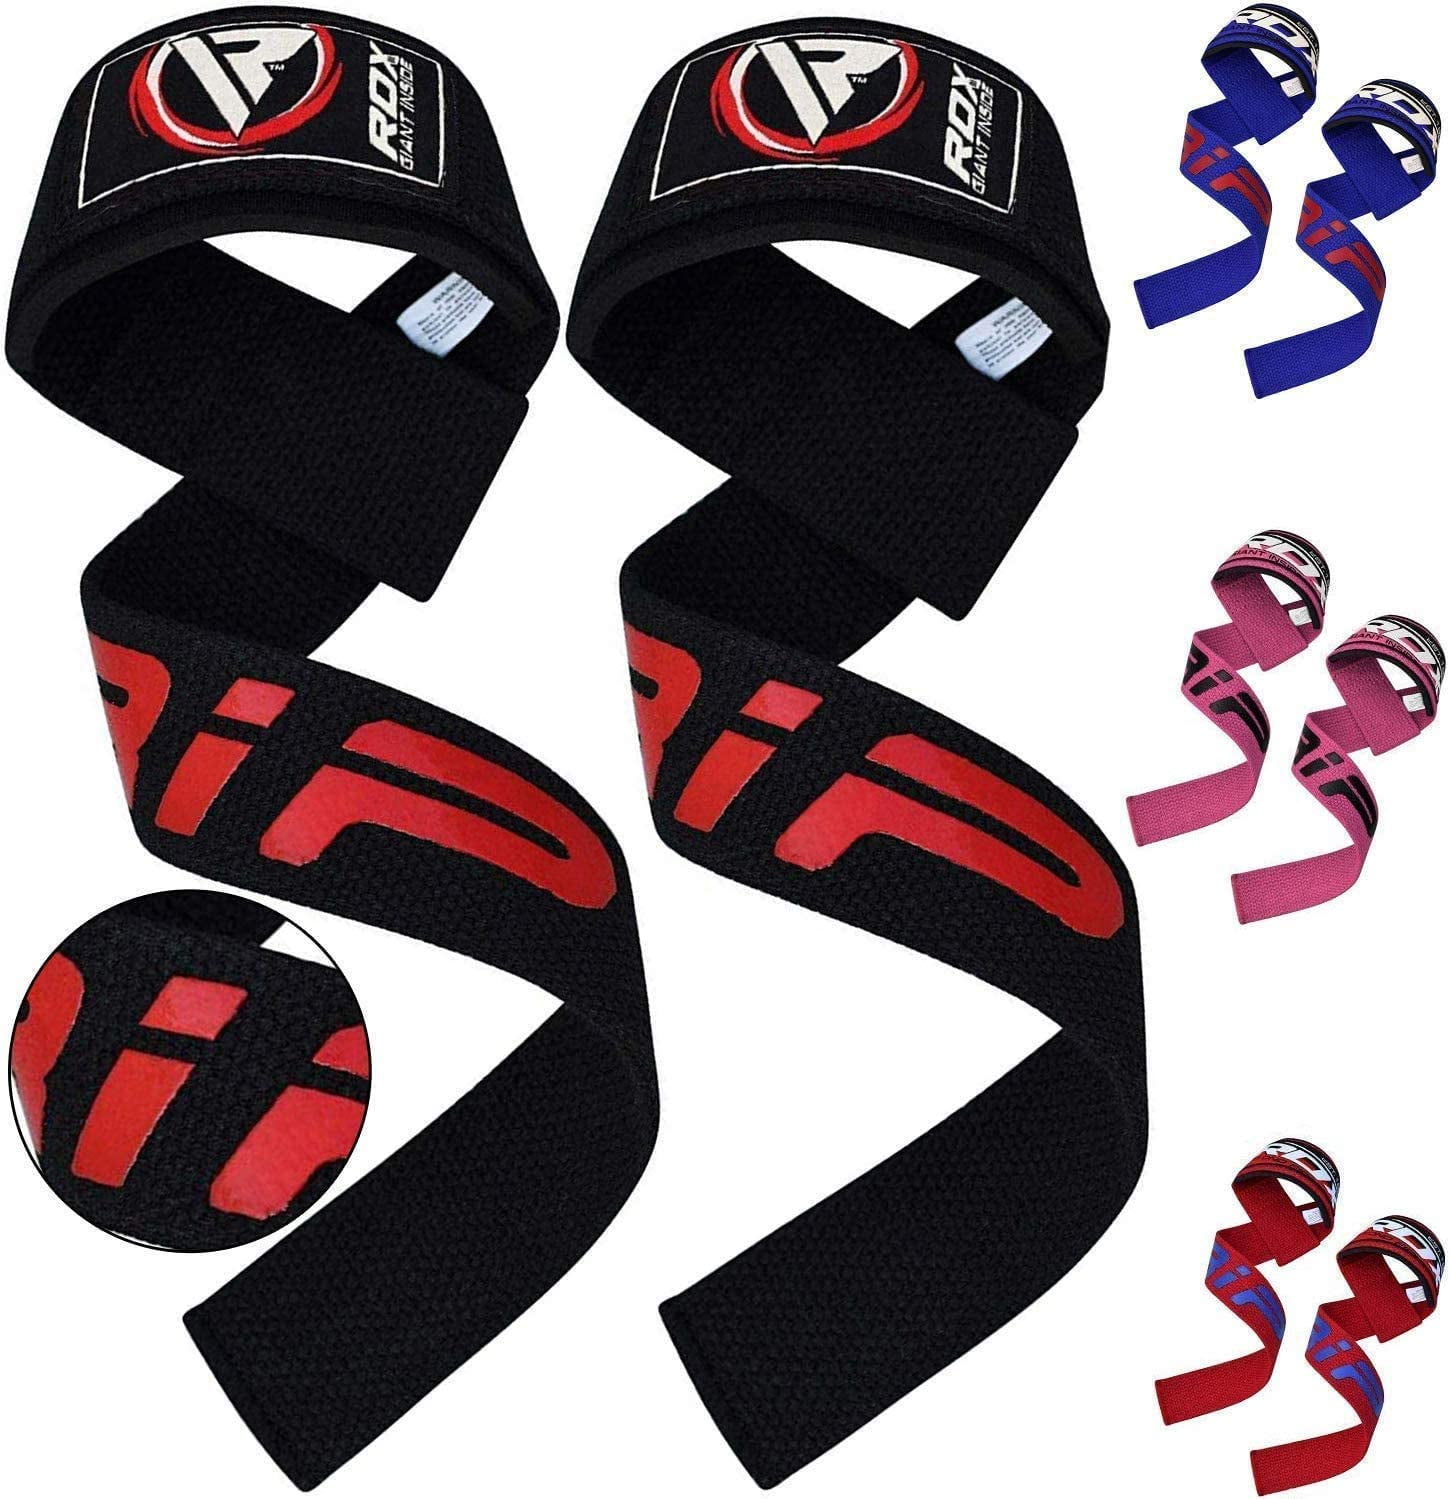 Weight Lifting Training Gym Straps Hand Bar Wrist Support Gloves Wrap Hook Strap 